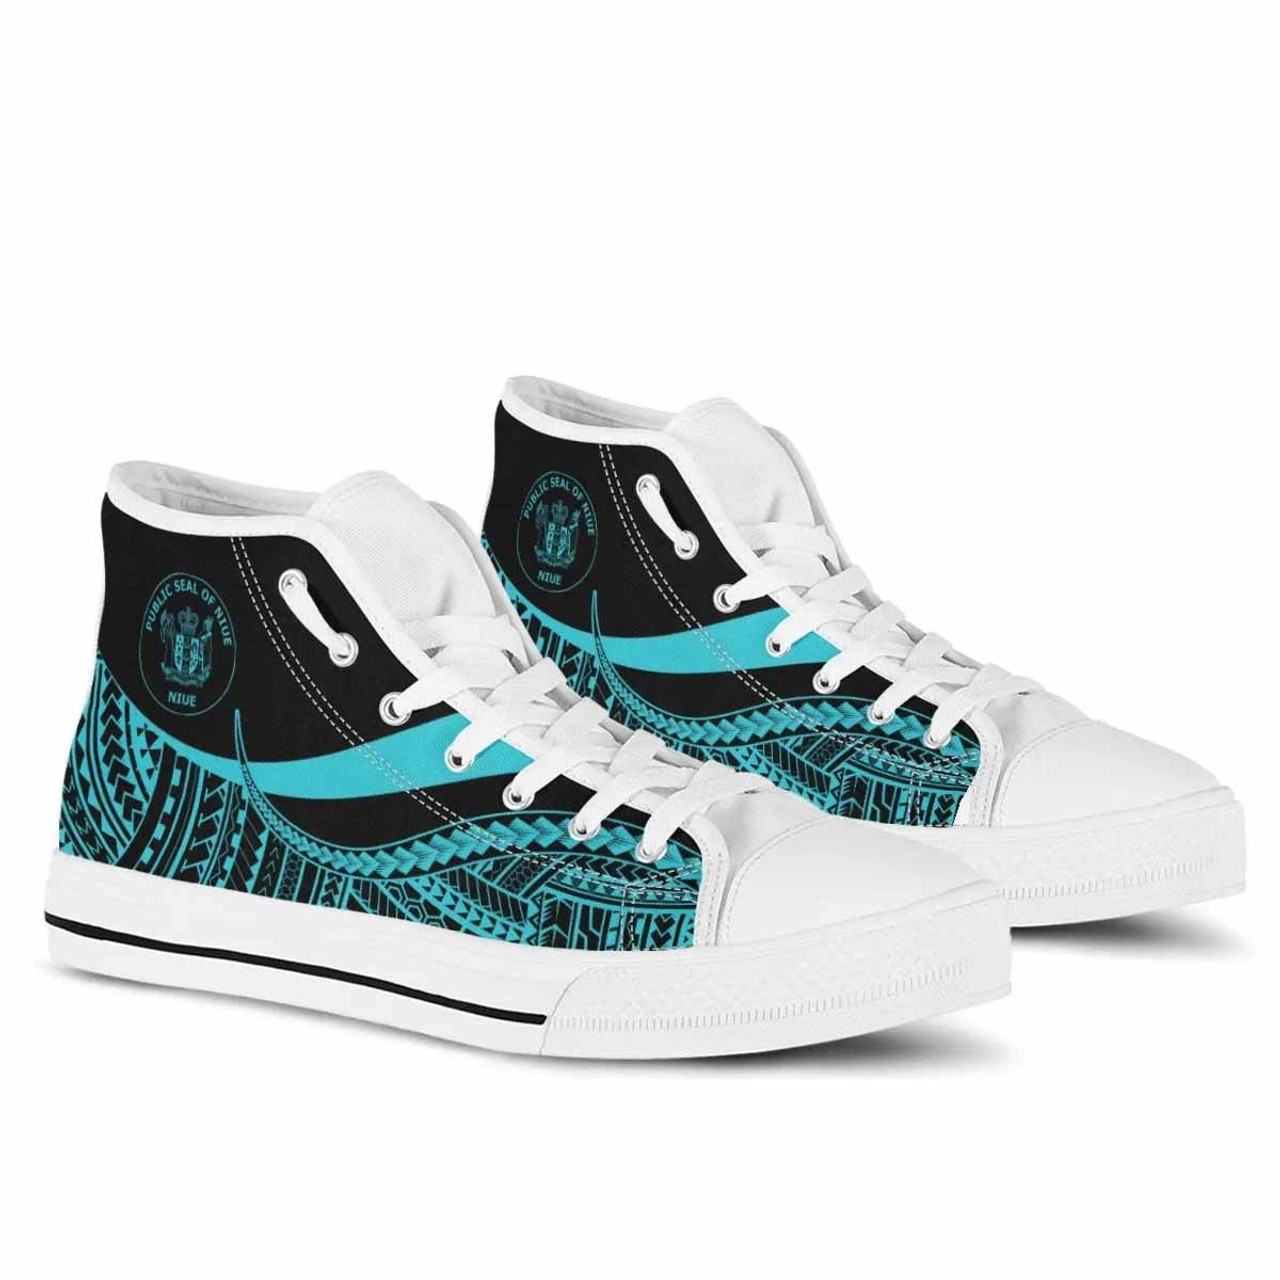 Niue High Top Shoes Turquoise - Polynesian Tentacle Tribal Pattern 6